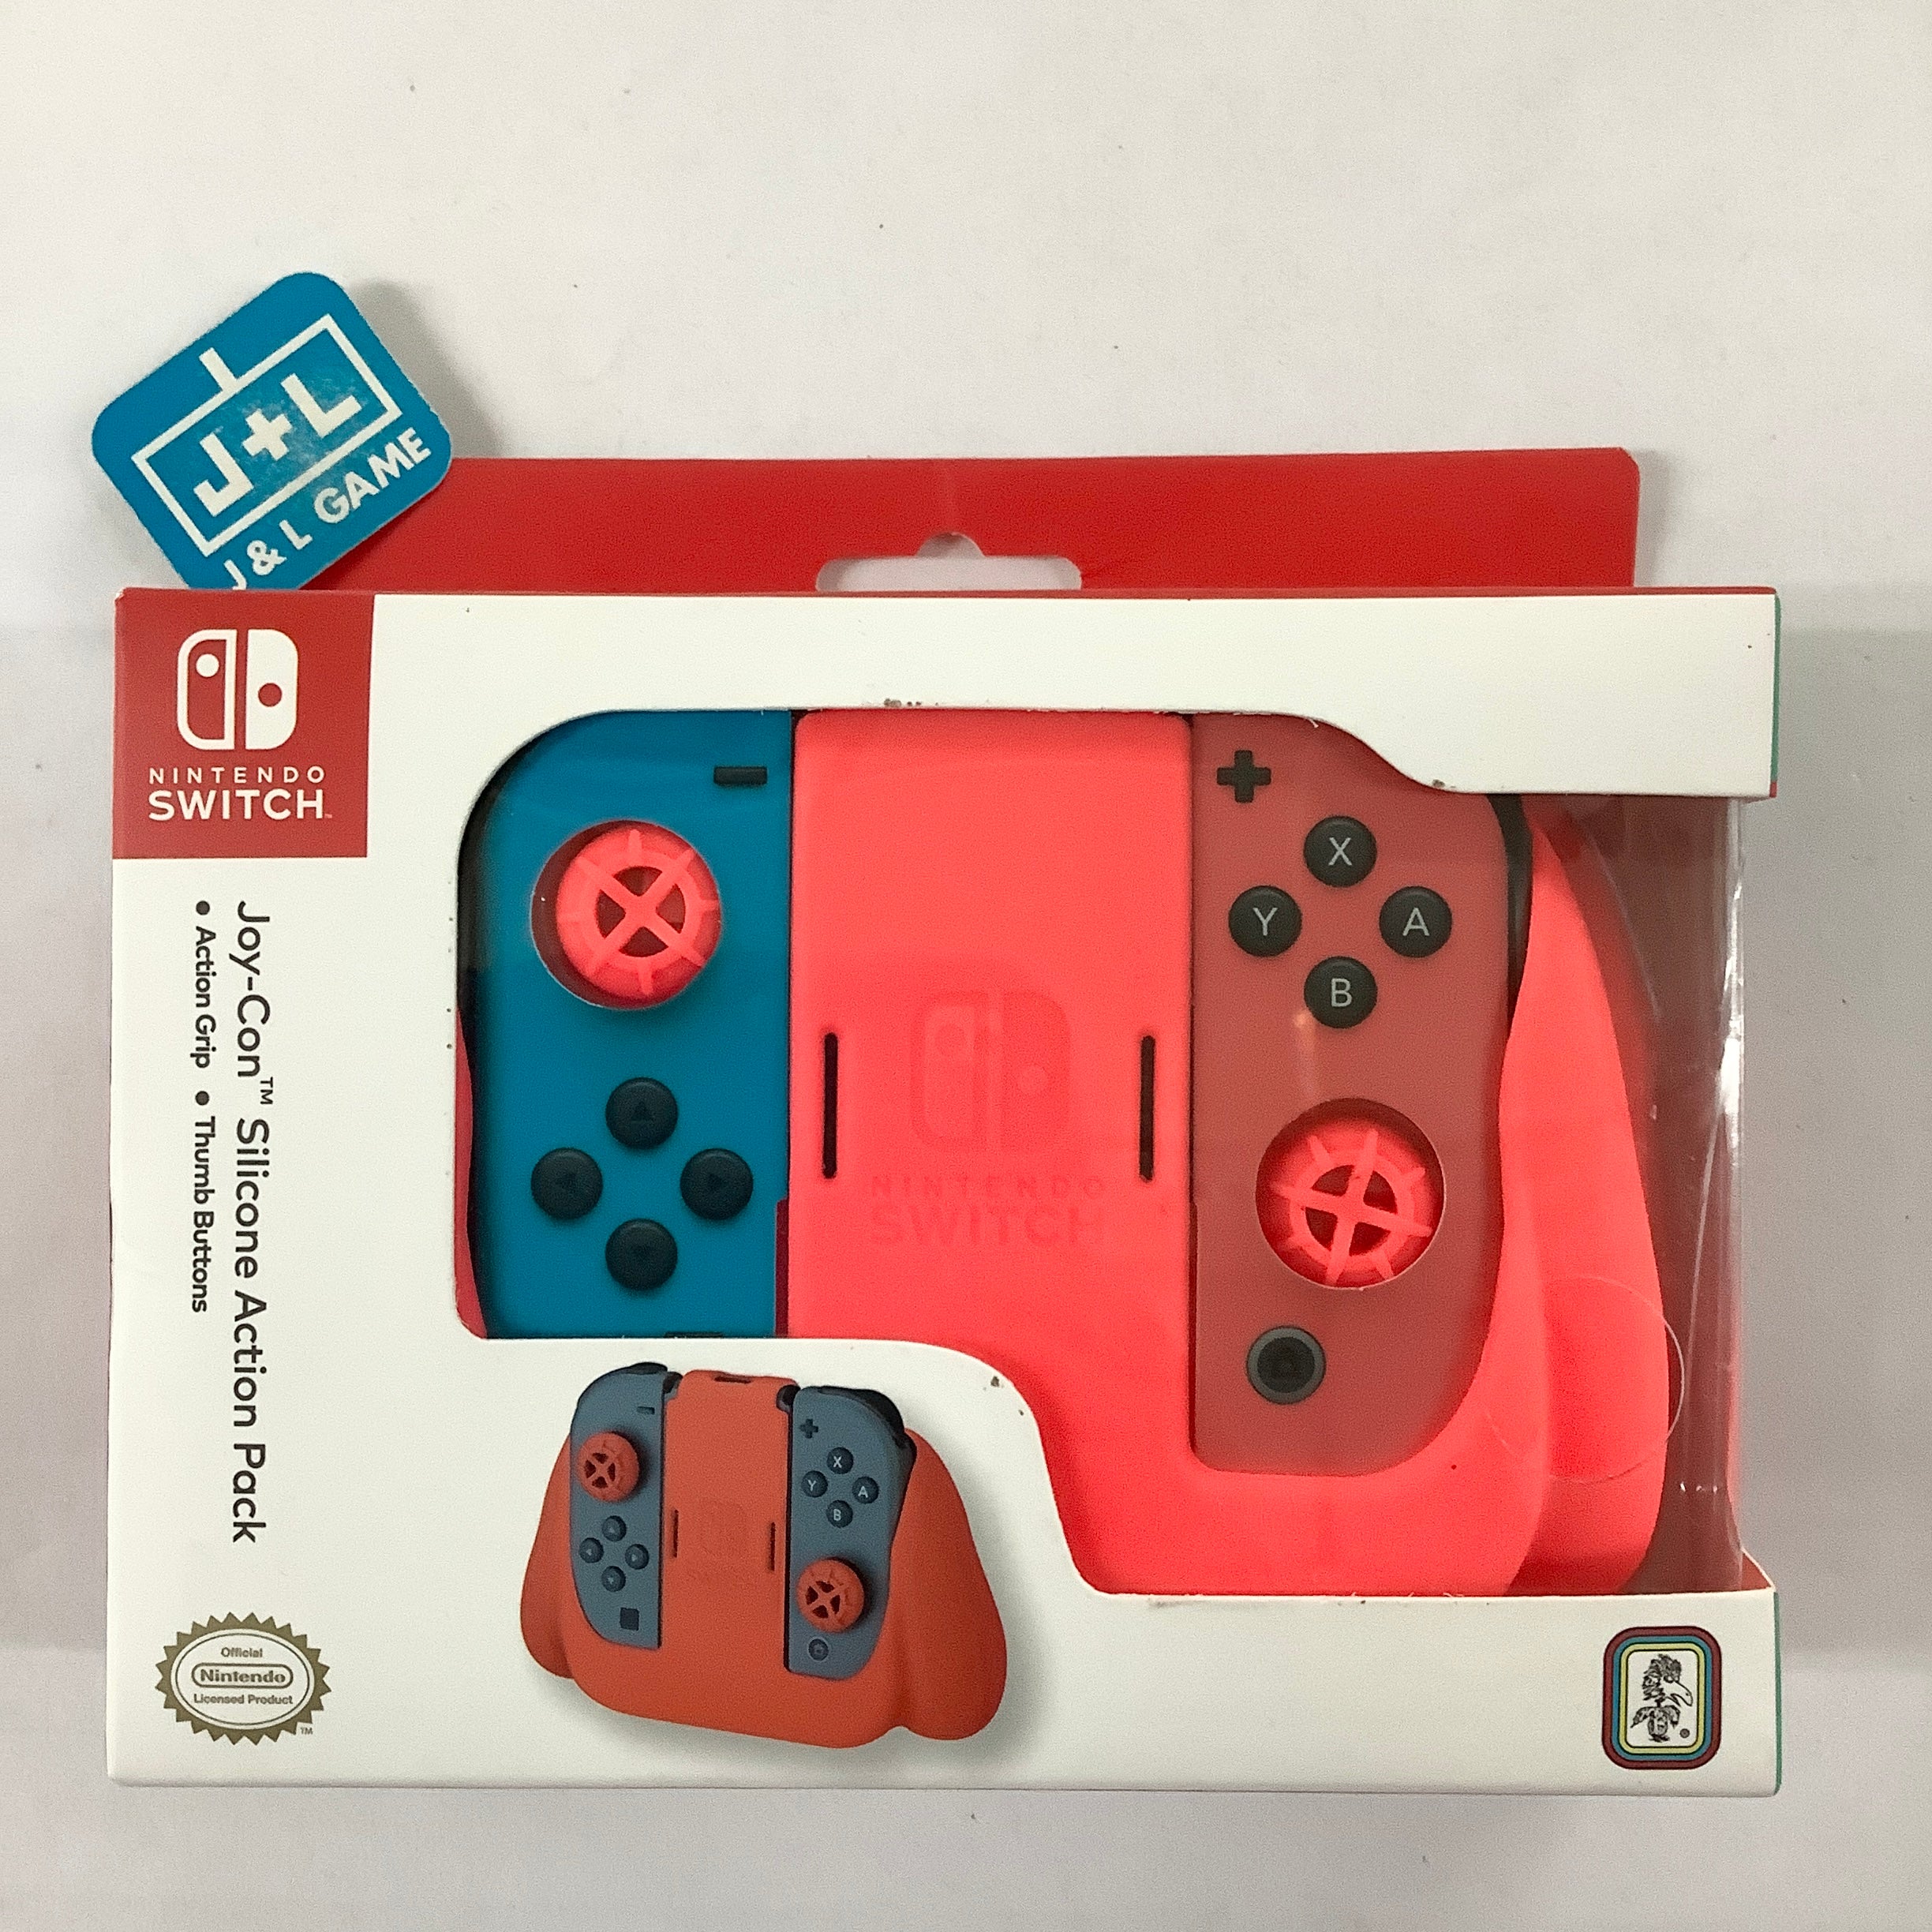 Nintendo Switch Joy-Con Action Pack Grip and Thumb Buttons – Red Textured Silicone - (NSW) Nintendo Switch